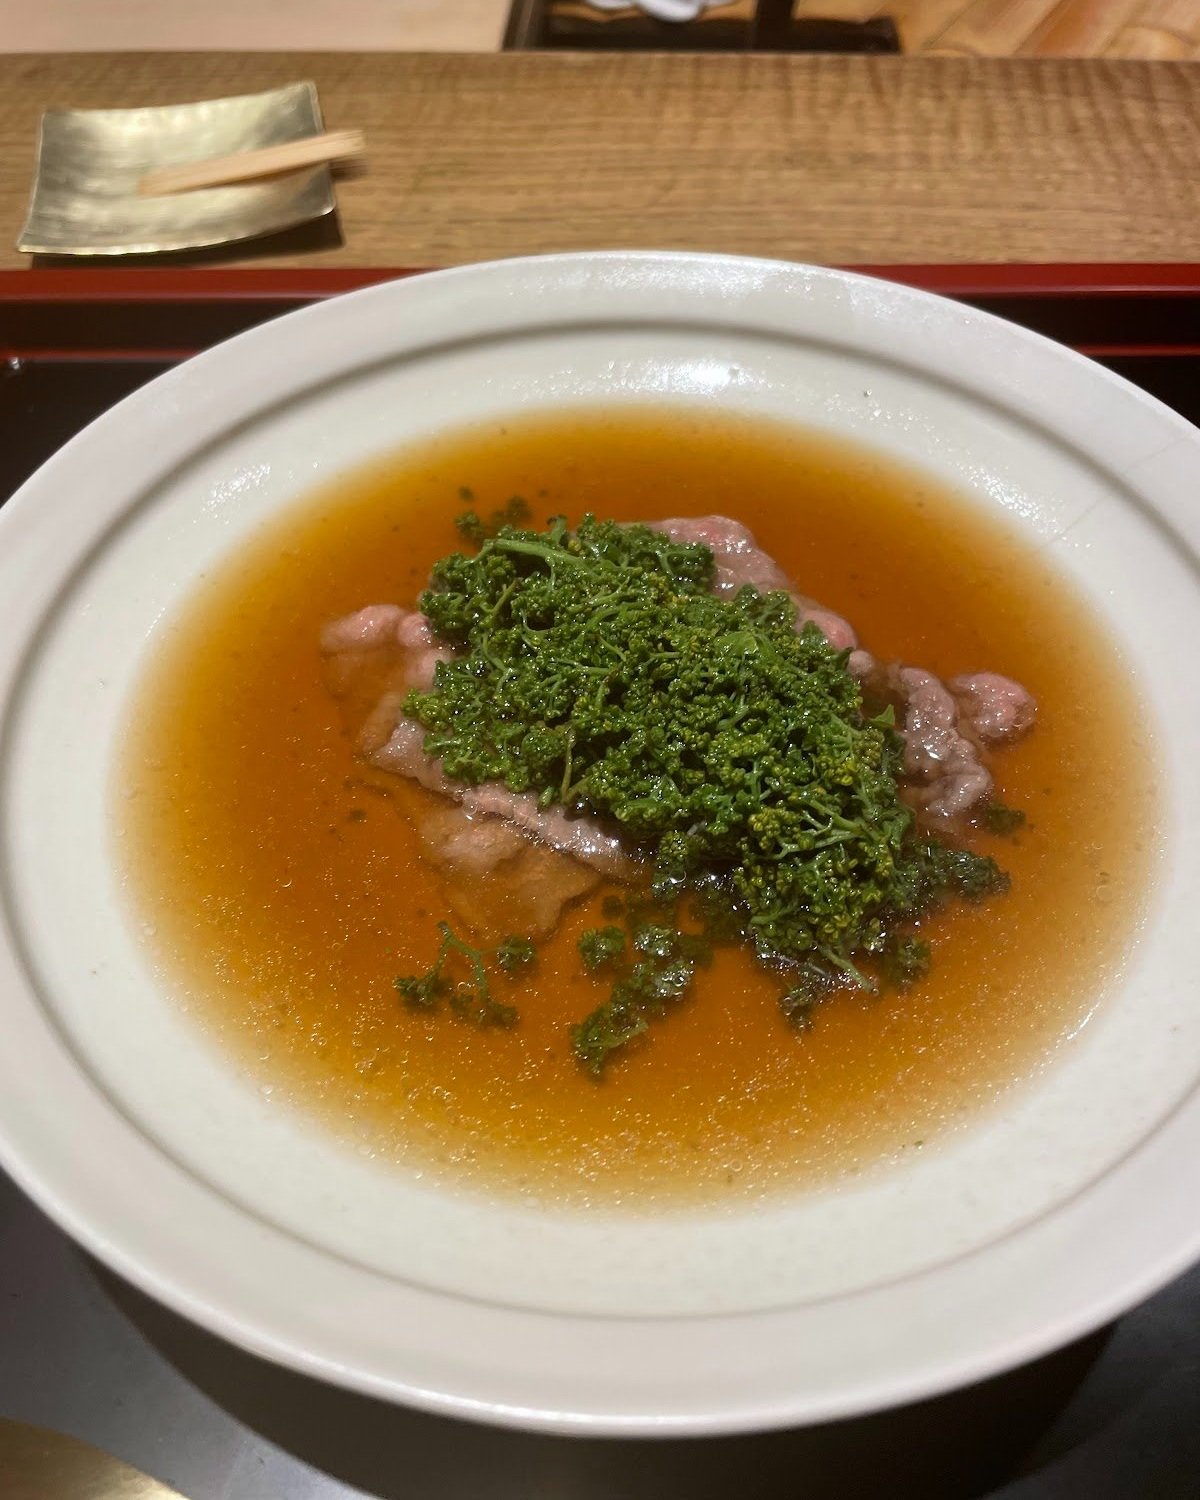 Sansho grown here is used to spice this dish of Wagyu in dashi.